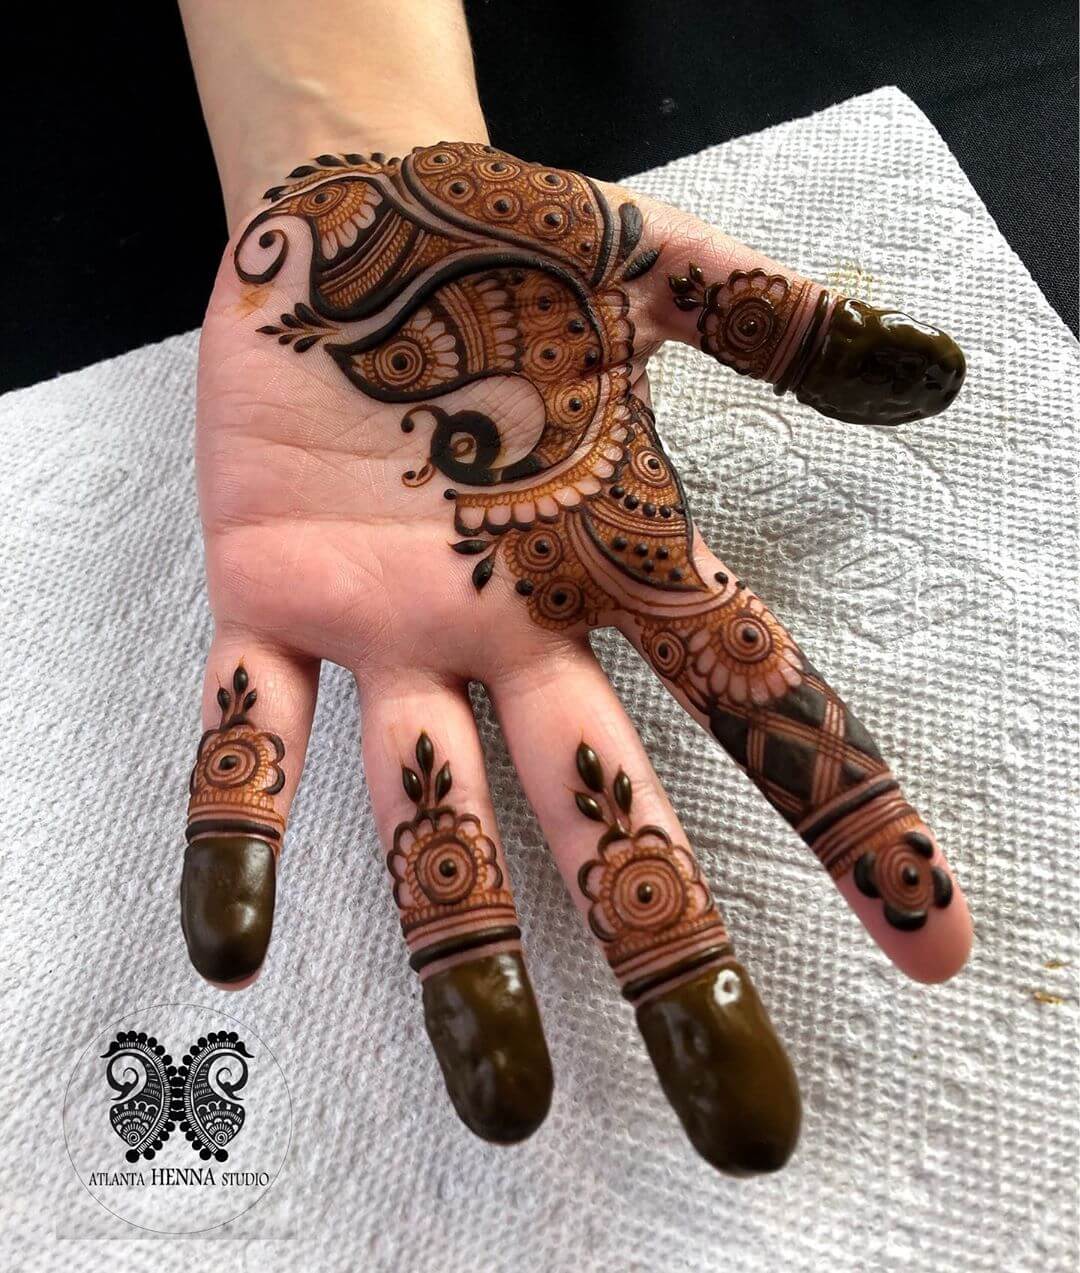 How to Apply Henna (Mehndi) on Your Hands! : 7 Steps - Instructables